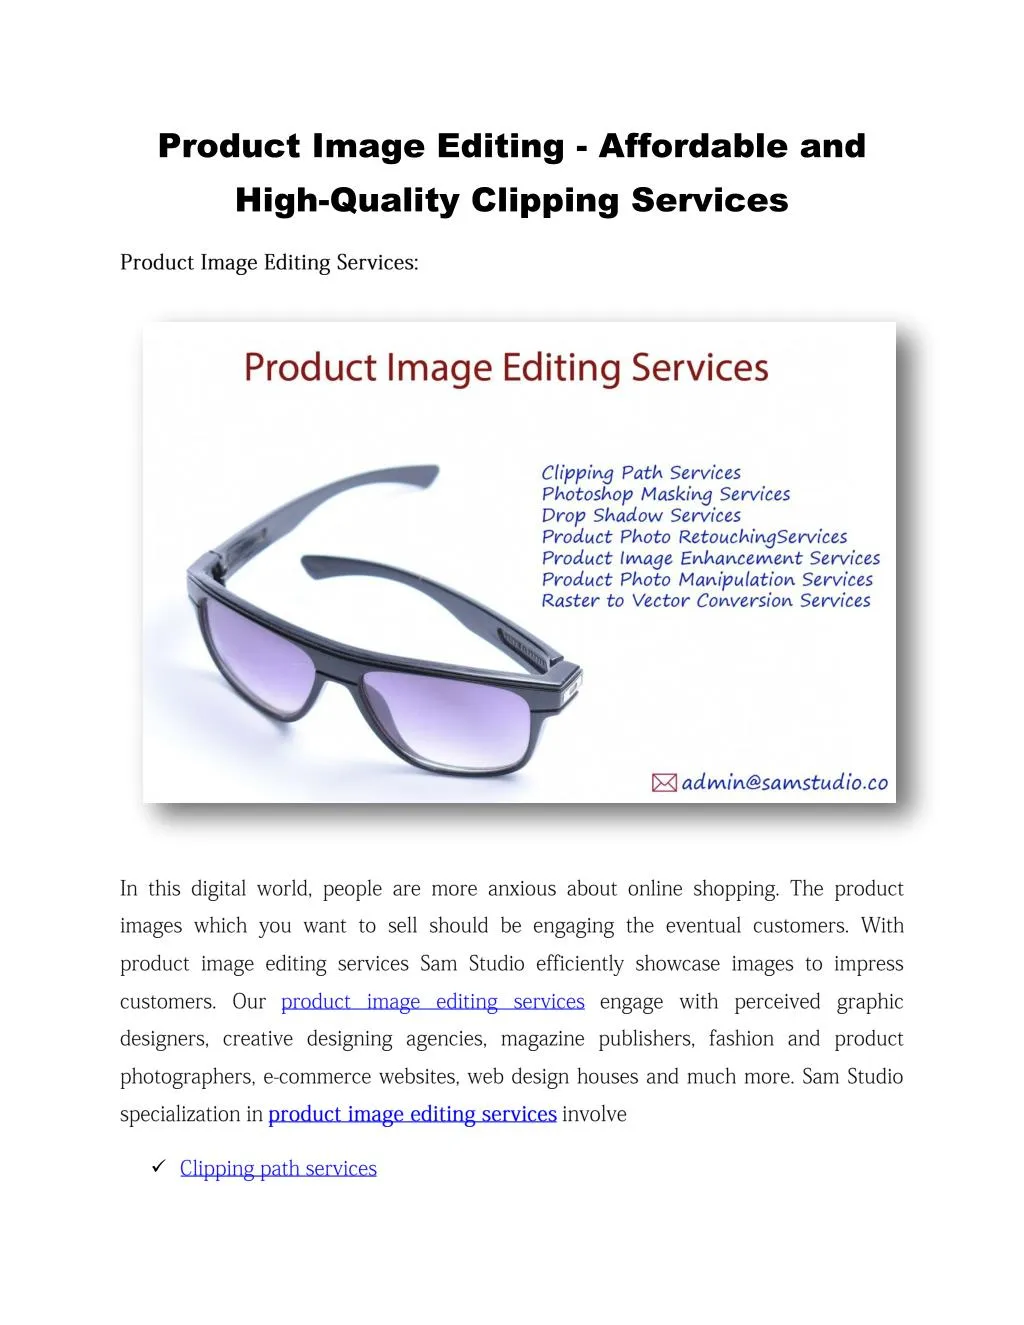 product image editing affordable and high quality